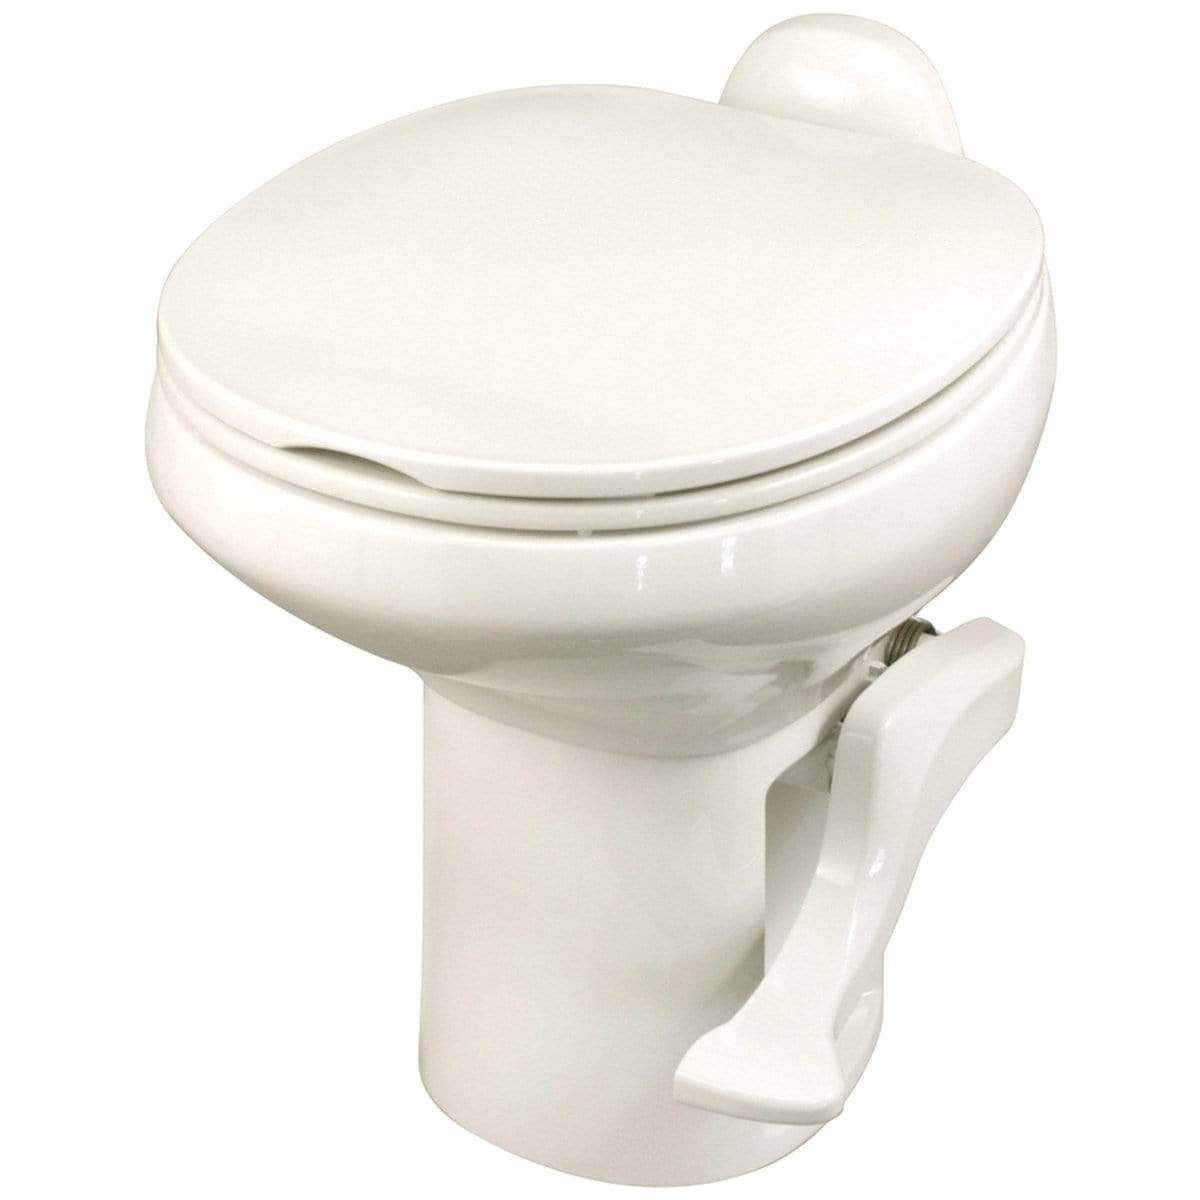 Thetford Not Qualified for Free Shipping Thetford Aqua-Magic Style II Toilet with Water Saver High Bone #42064